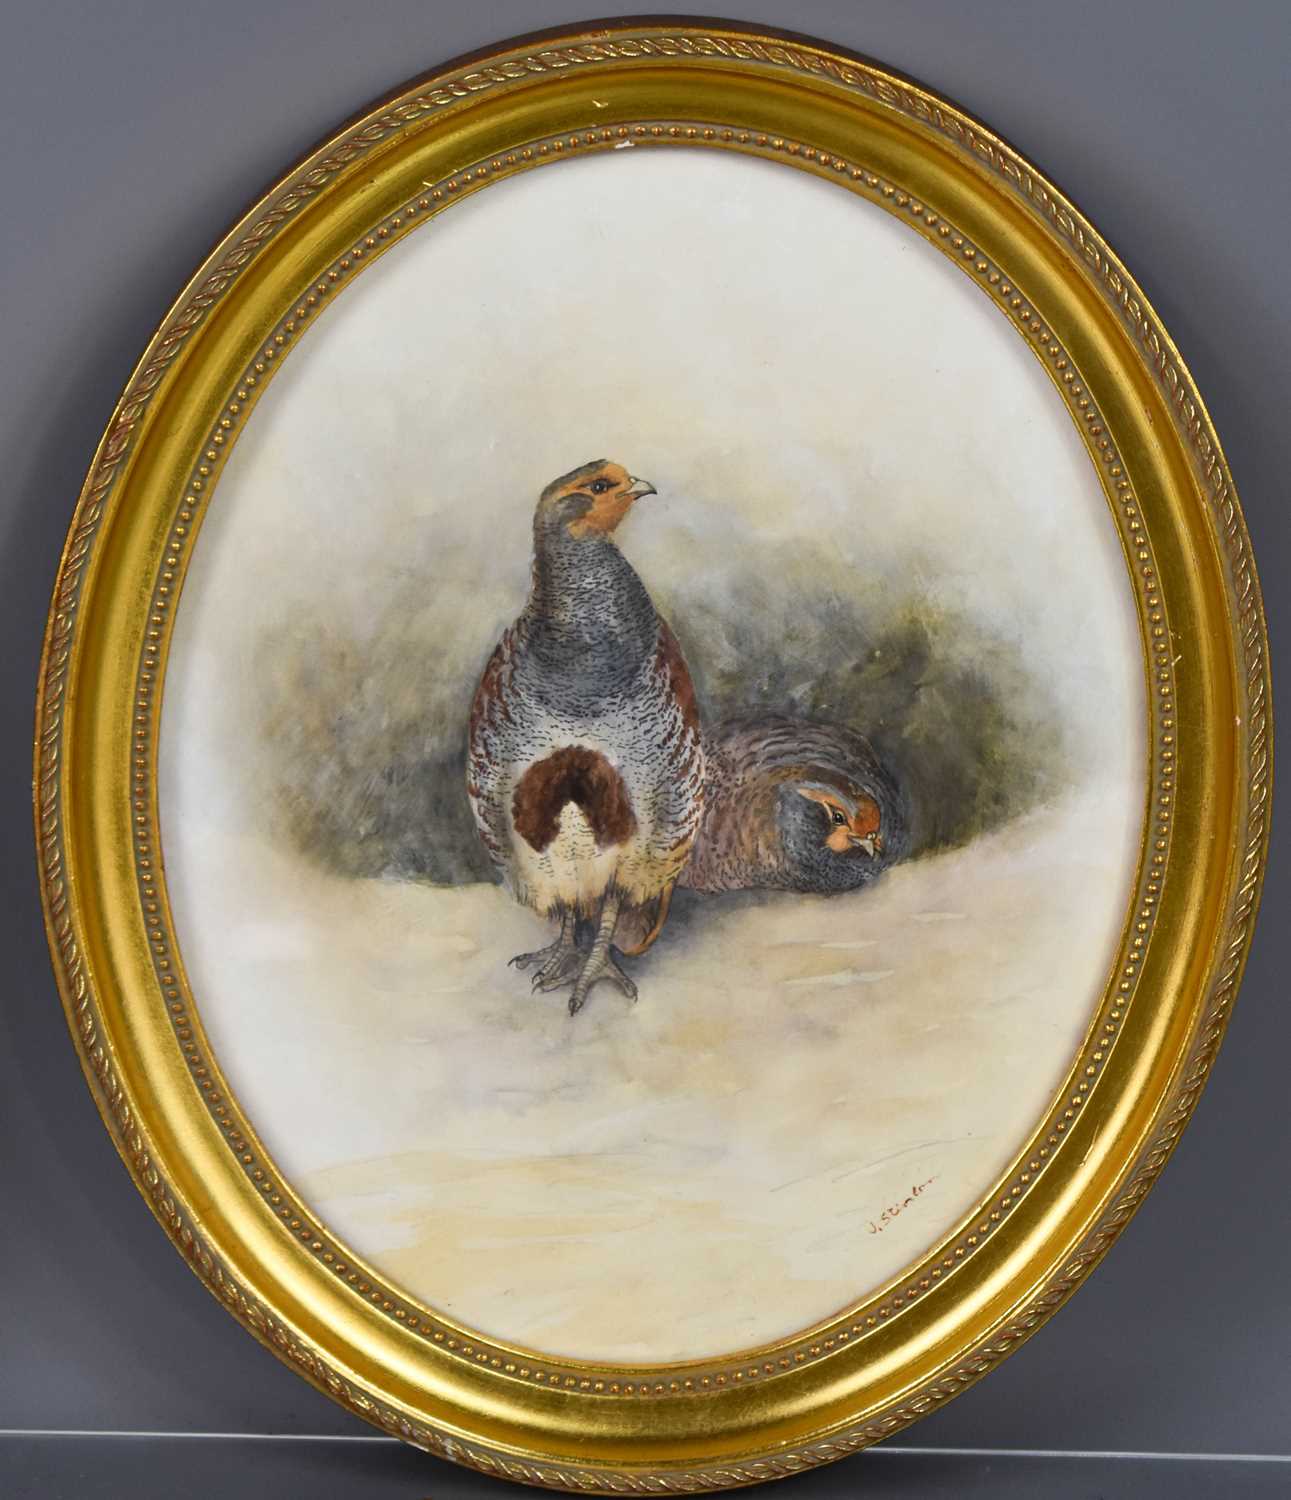 JAS Stinton, two grouse, watercolour, signed, within an oval frame, 10ins diameter.